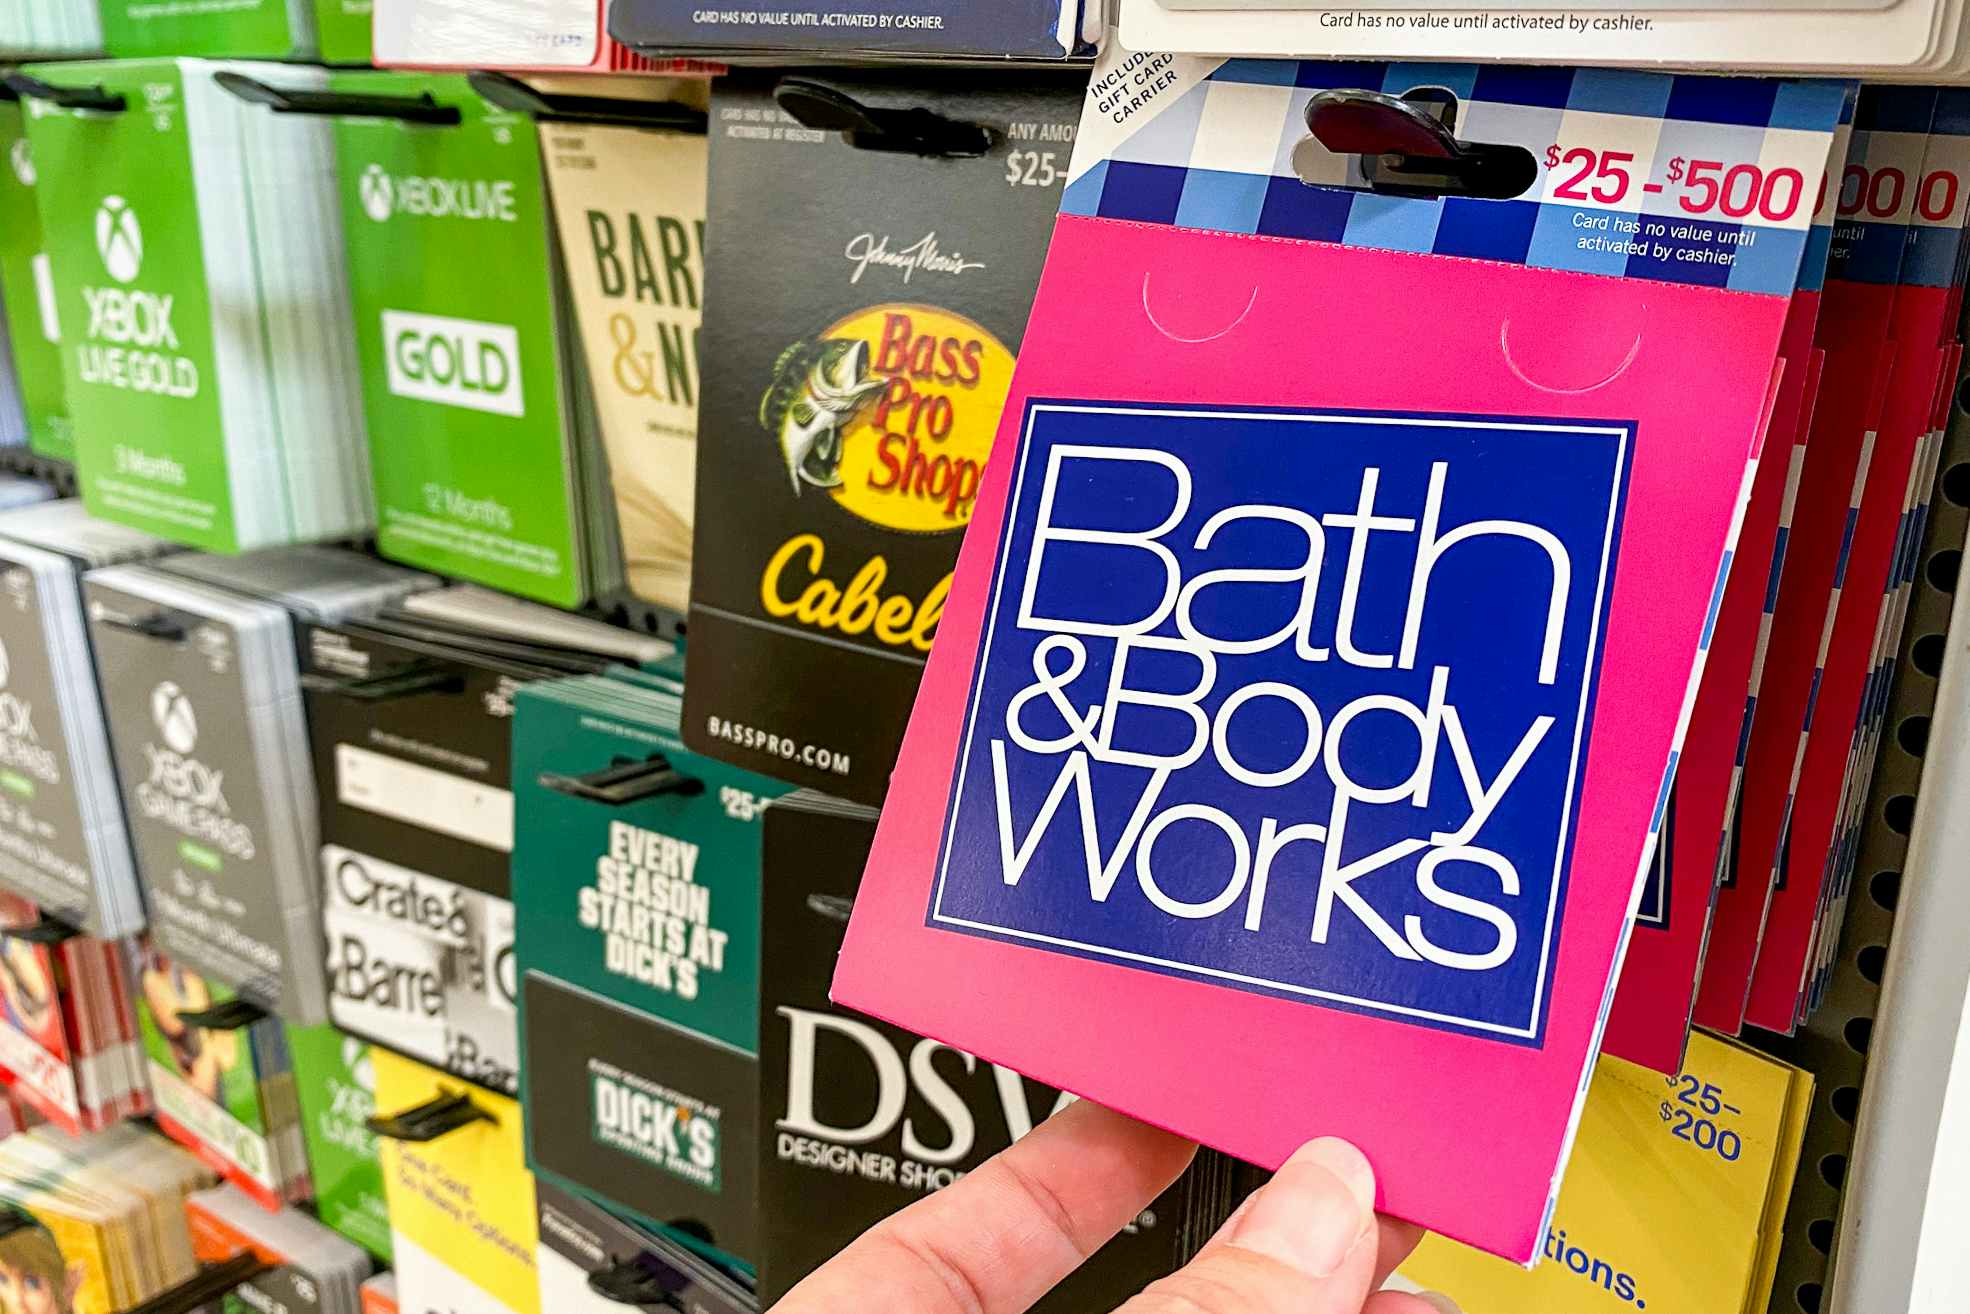 A person's hand taking a Bath & Body Works gift card from a display of gift cards at Walmart.